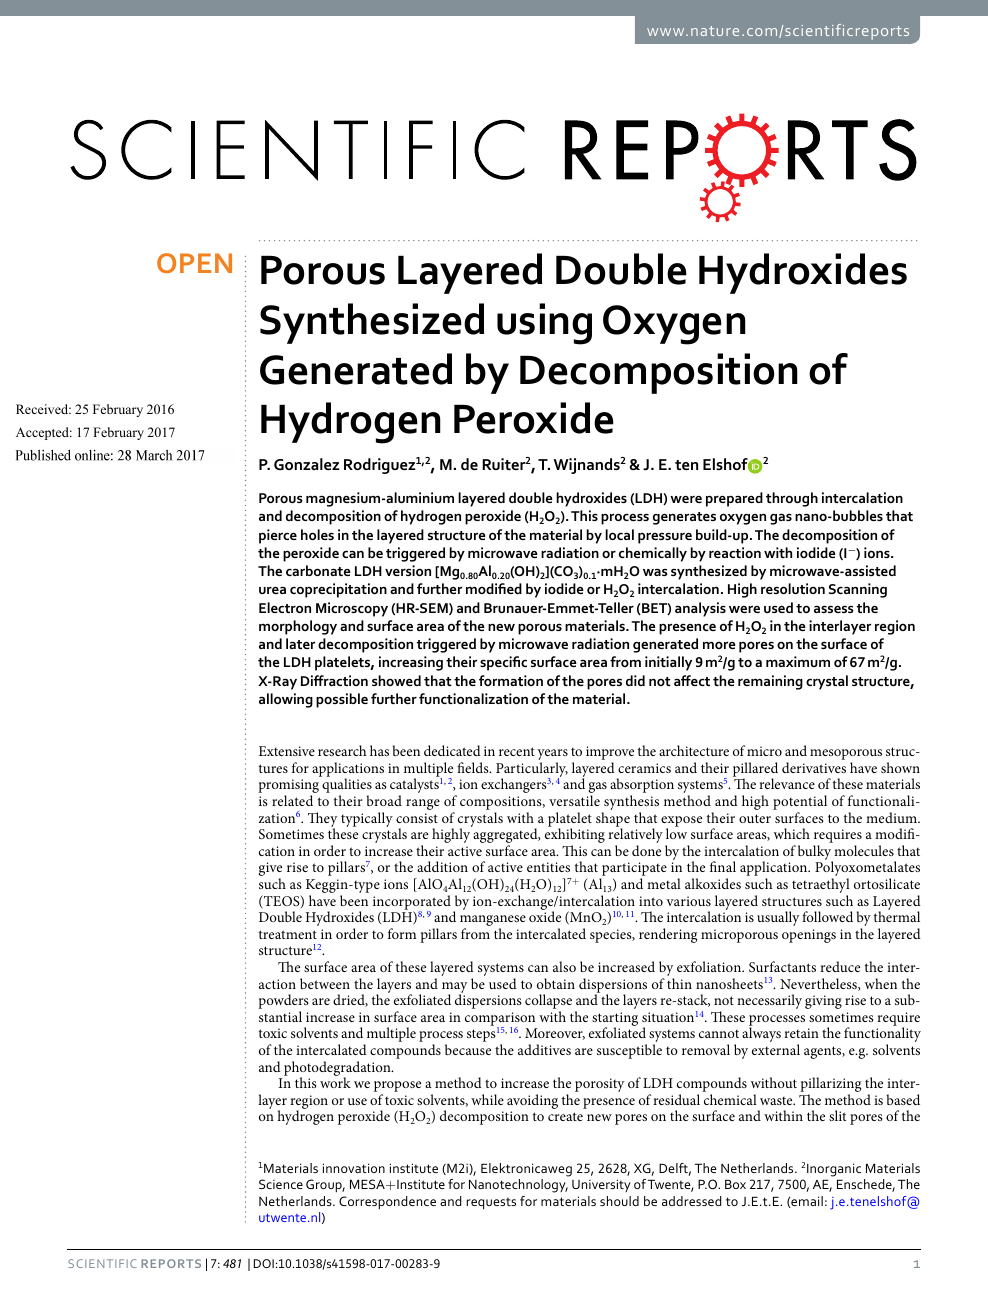 Porous Layered Double Hydroxides Synthesized Using Oxygen Generated By Decomposition Of Hydrogen Peroxide Topic Of Research Paper In Chemical Sciences Download Scholarly Article Pdf And Read For Free On Cyberleninka Open